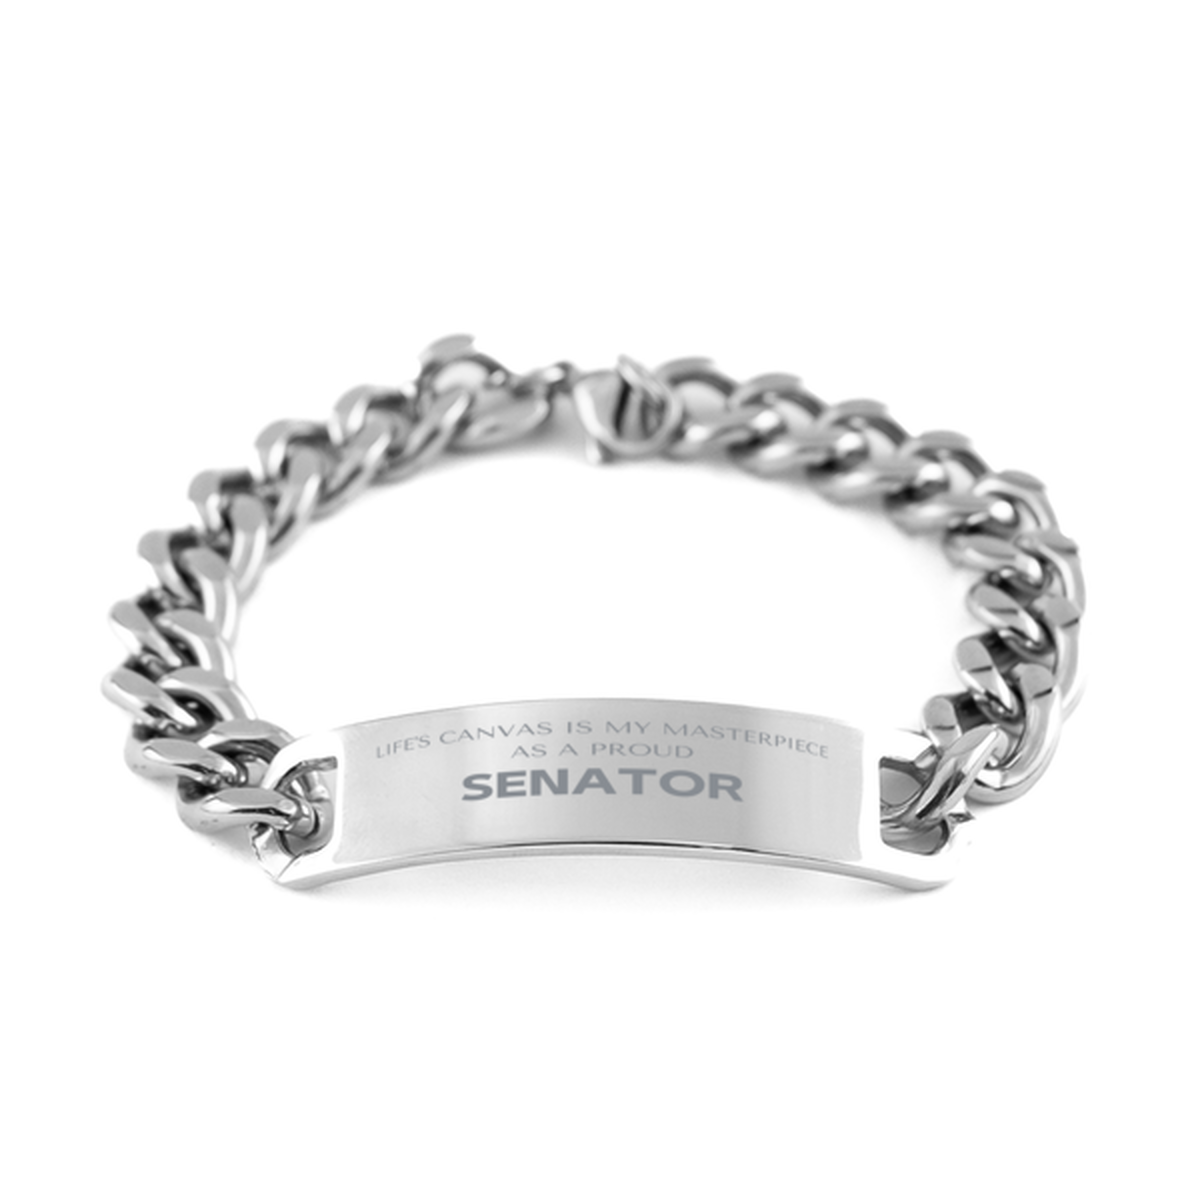 Proud Senator Gifts, Life's canvas is my masterpiece, Epic Birthday Christmas Unique Cuban Chain Stainless Steel Bracelet For Senator, Coworkers, Men, Women, Friends